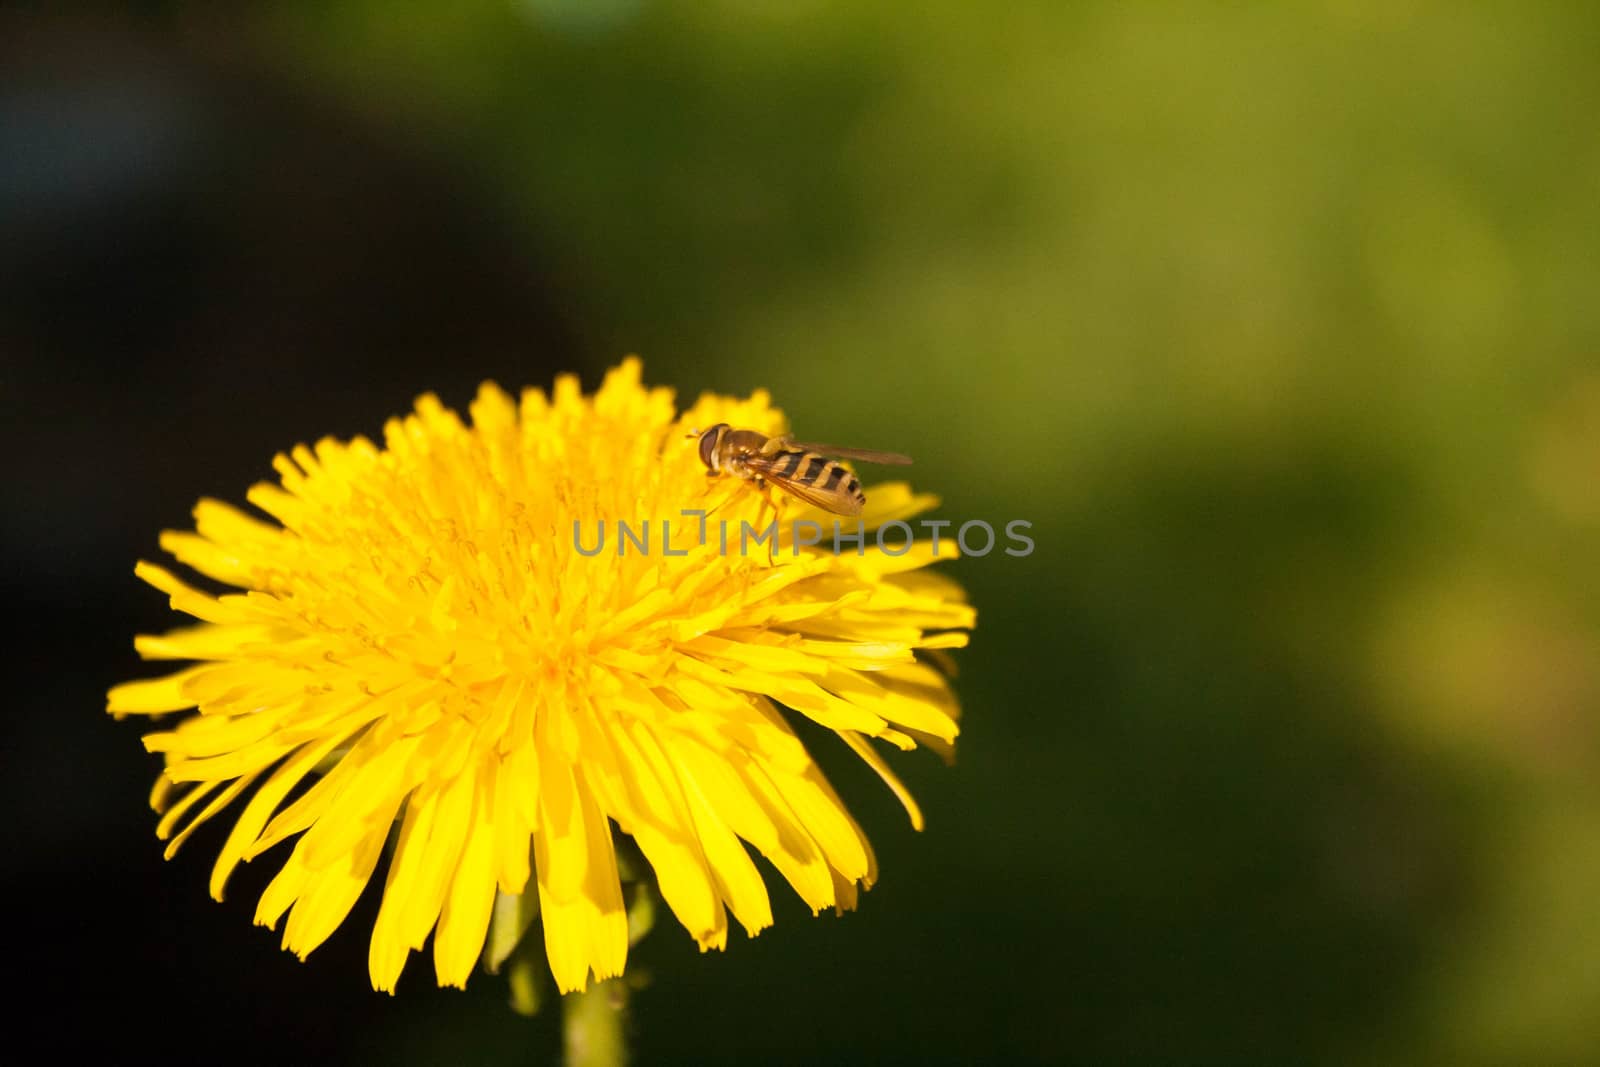 A hoverfly on a dandelion in a garden.